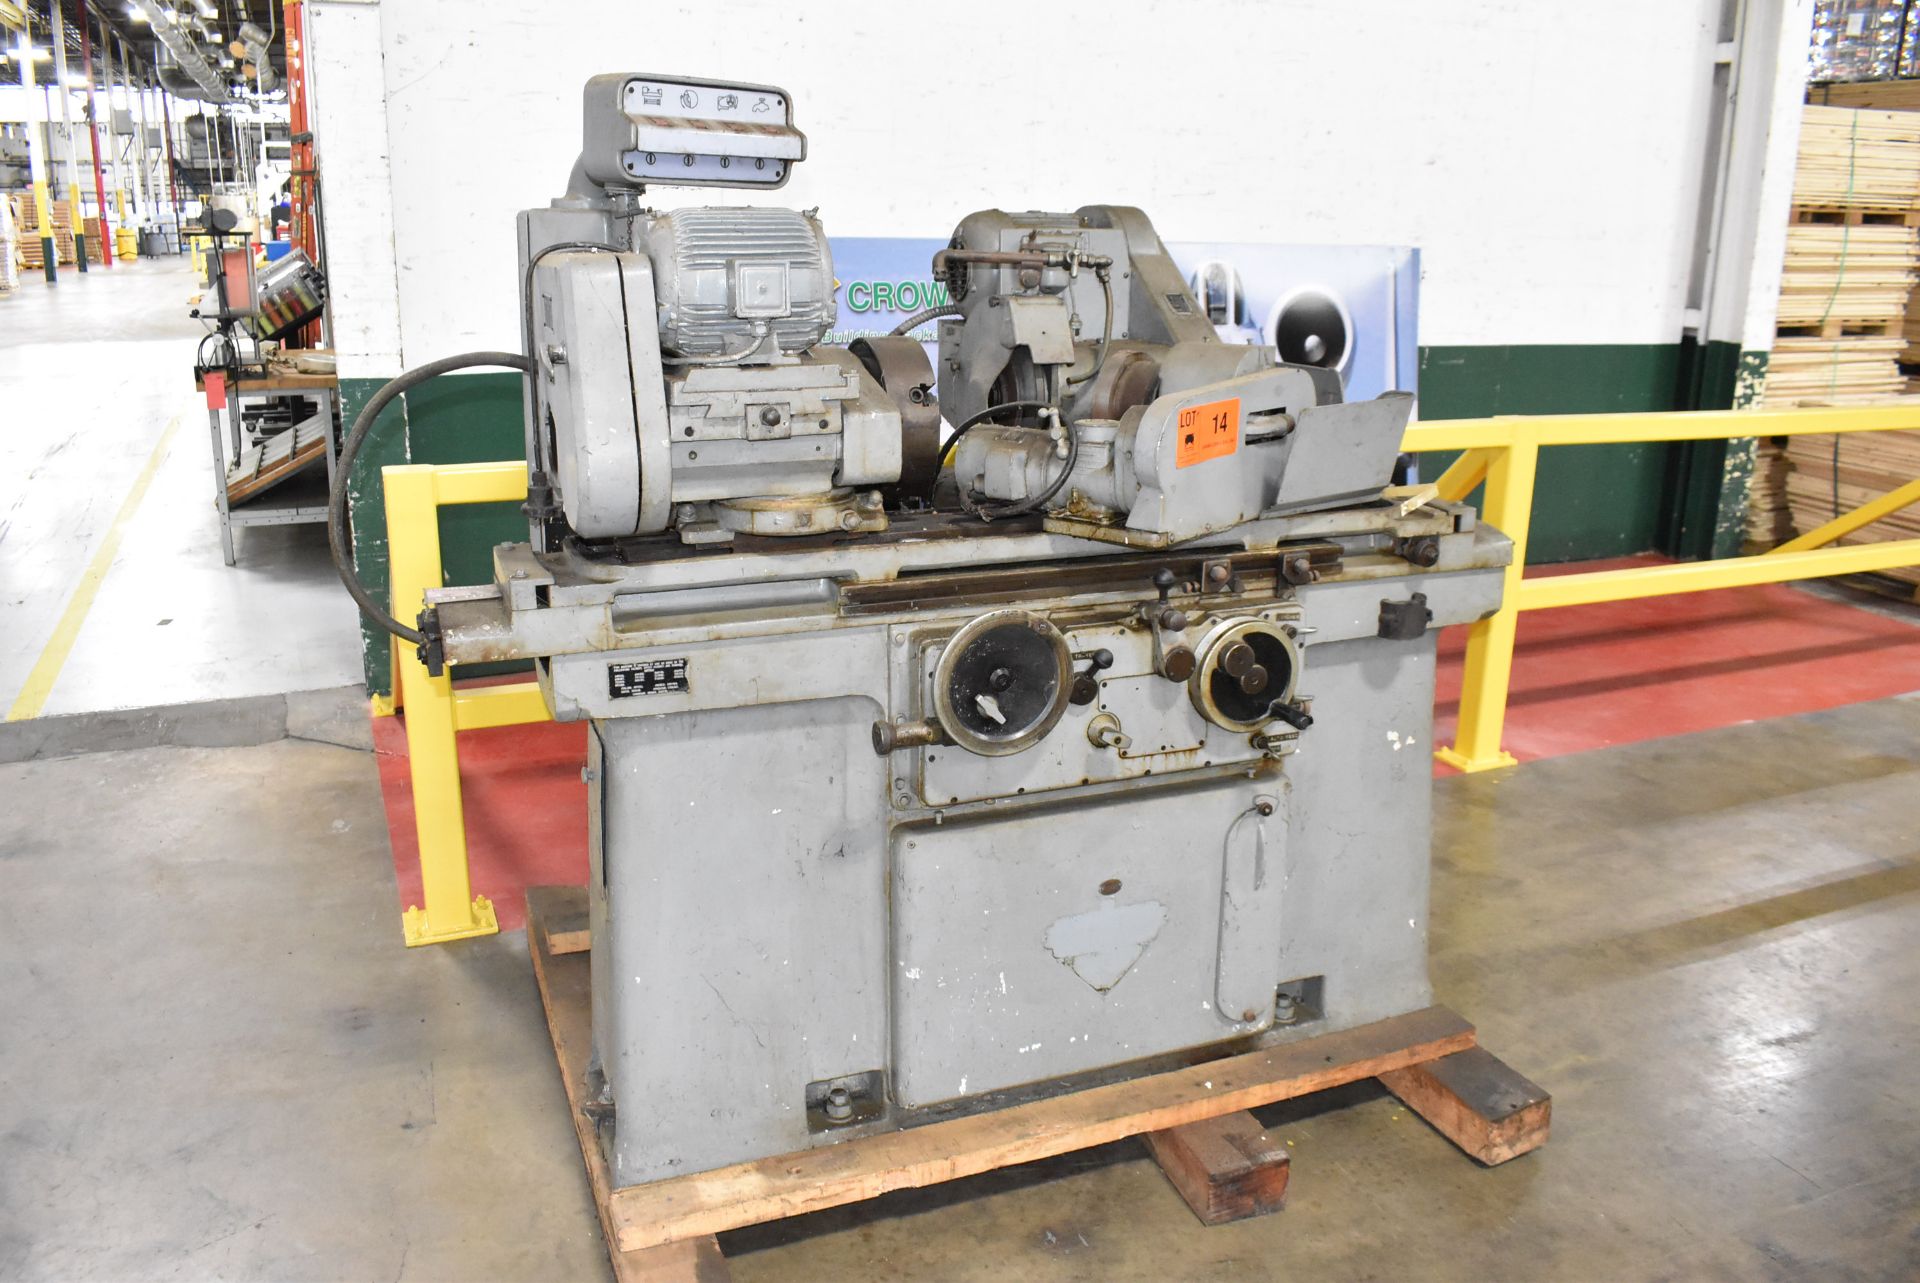 JONES SHIPMAN UNIVERSAL CYLINDRICAL AND INTERNAL GRINDER WITH 10" 4 JAW CHUCK, MAIN SPINDLE SPEEDS - Image 15 of 15